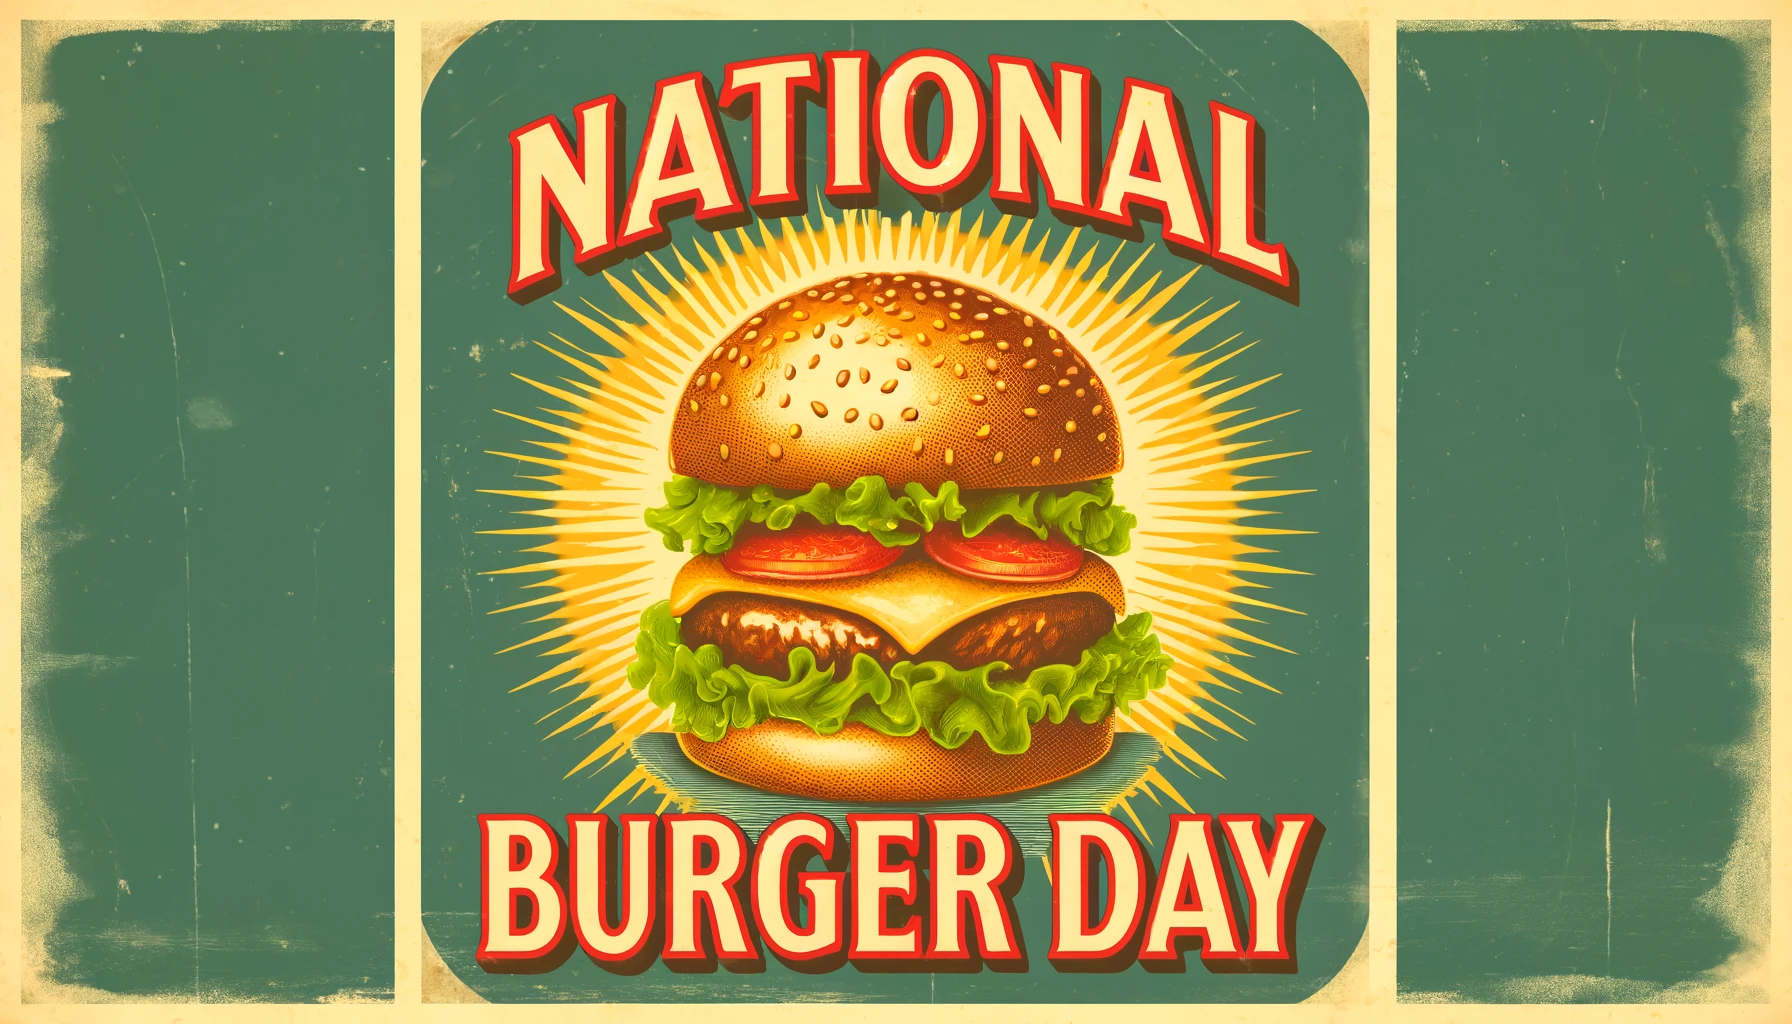 Delicious Burger Day Greetings for Friends and Family